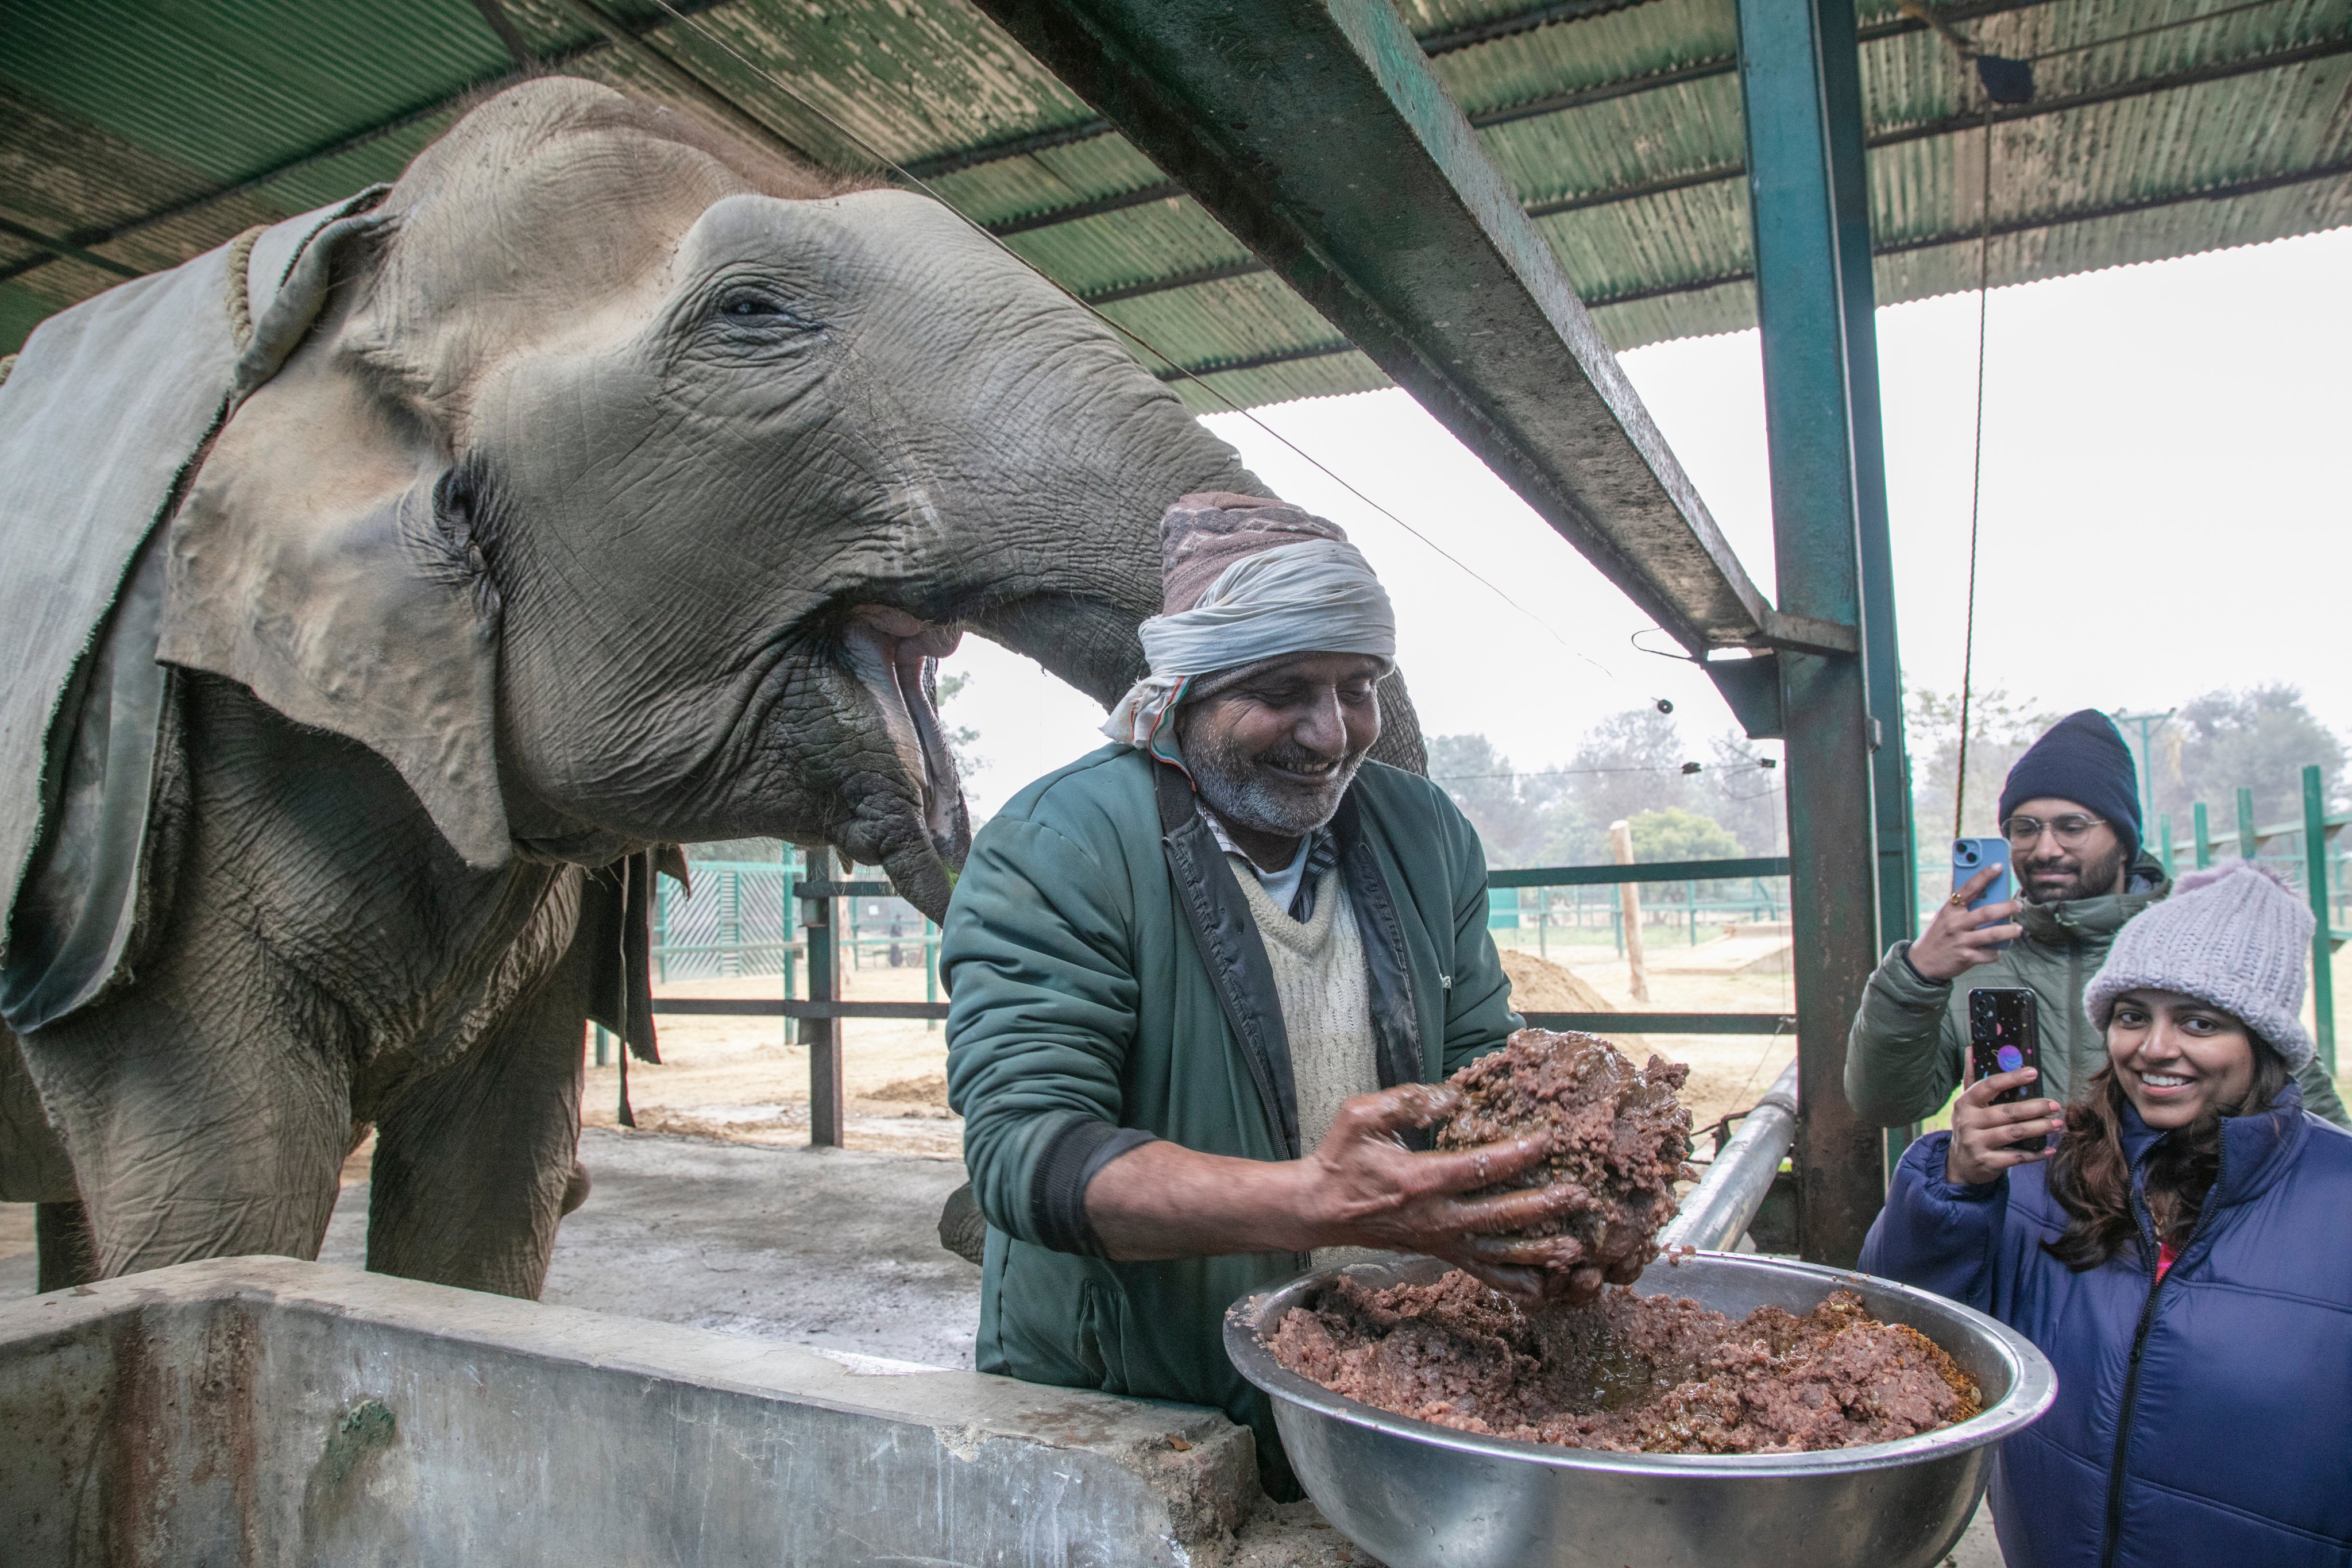 Suzy, a 72-year-old elephant who is toothless and blind, gets ready to receive a meal from Babulal, a former mahout (elephant driver), at the Elephant Conservation and Care Centre in Mathura, India. Photo: Siddharth Khandelwal